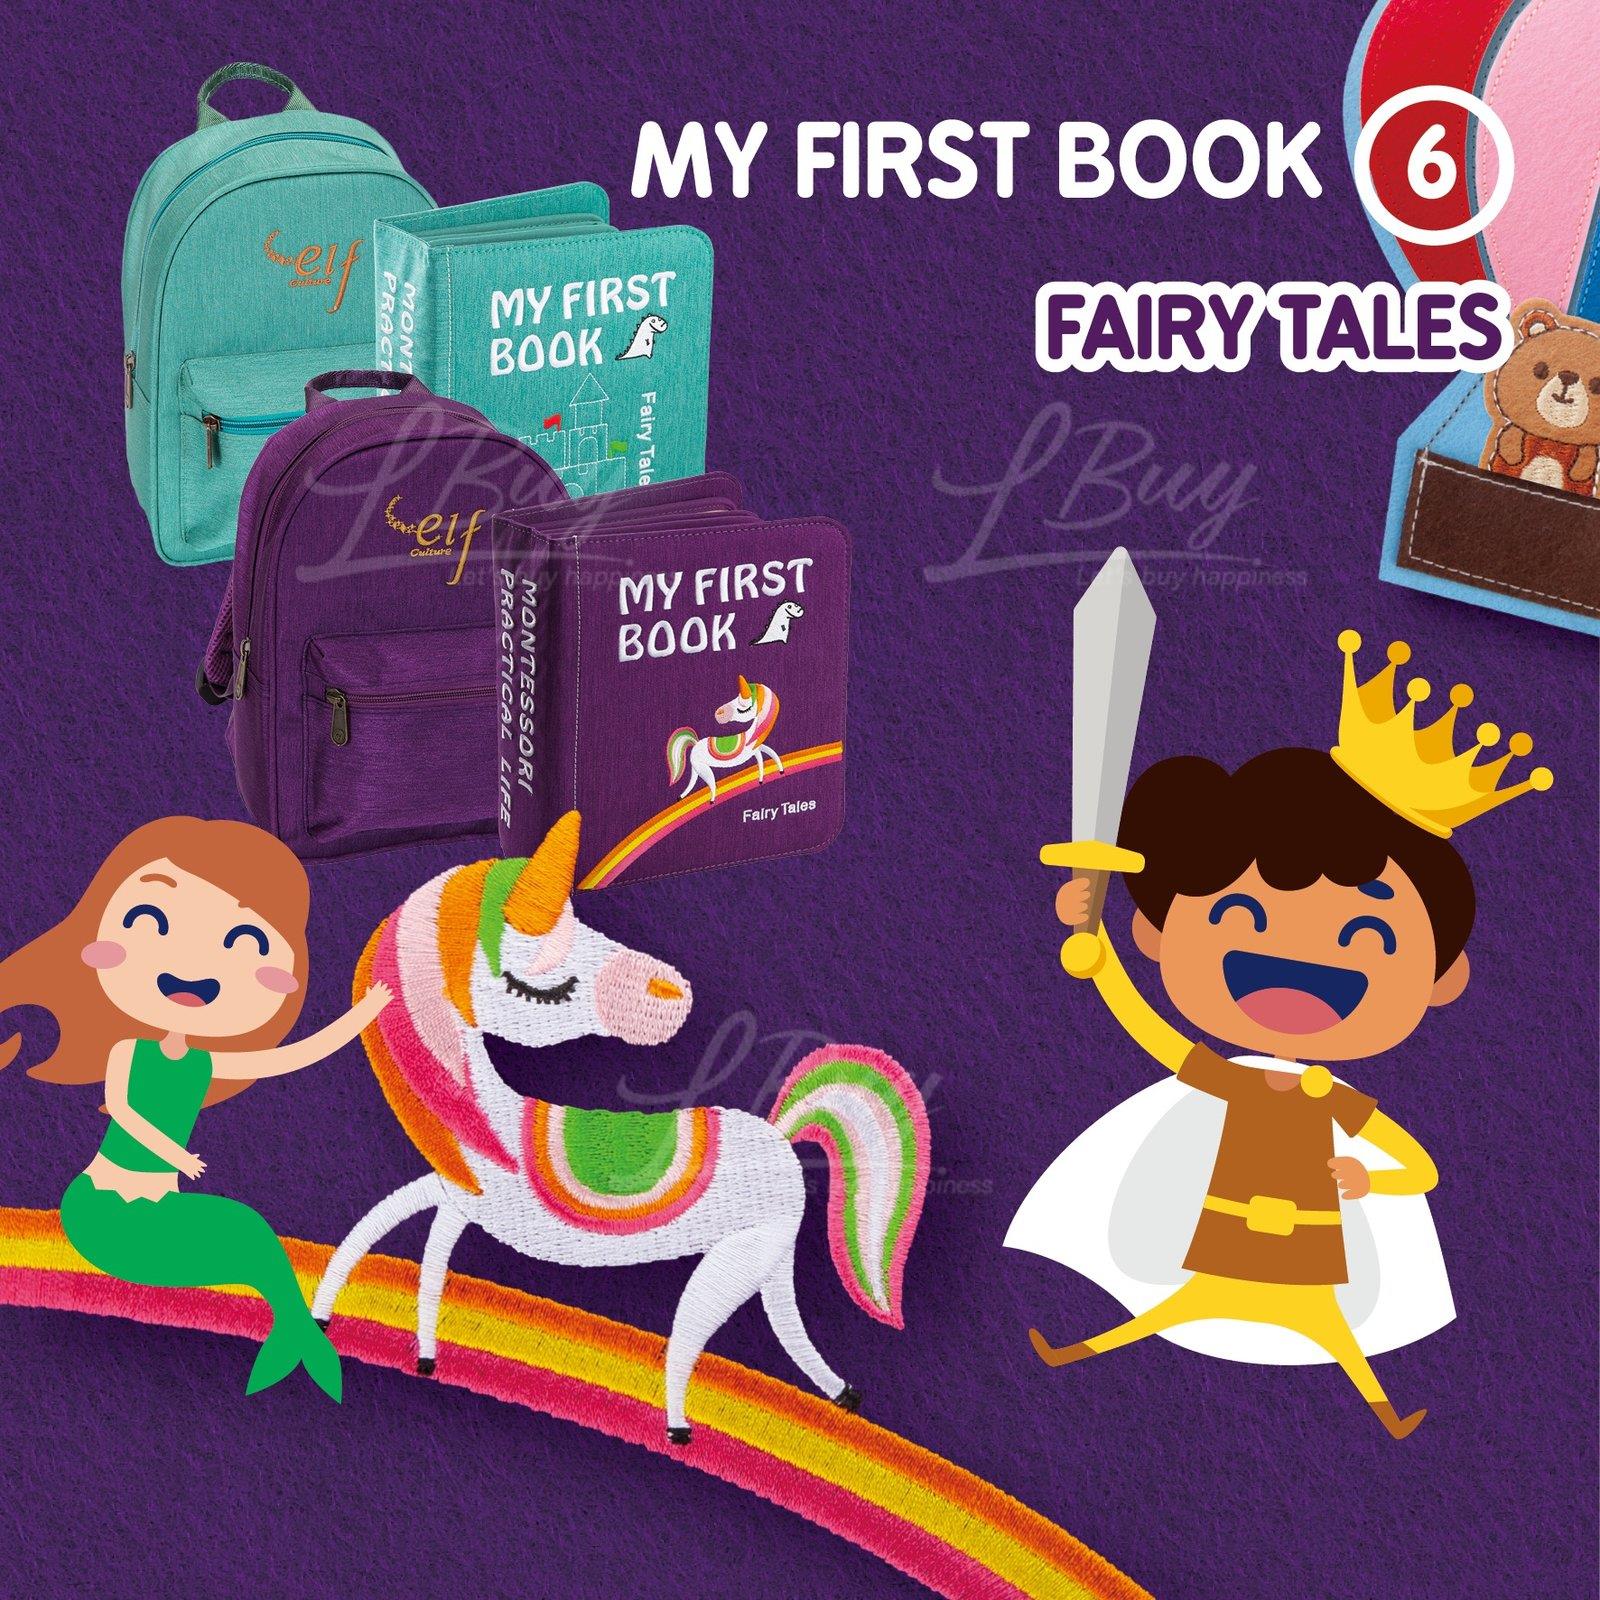 My First Book 6 - Fairy Tales (0-3Y)